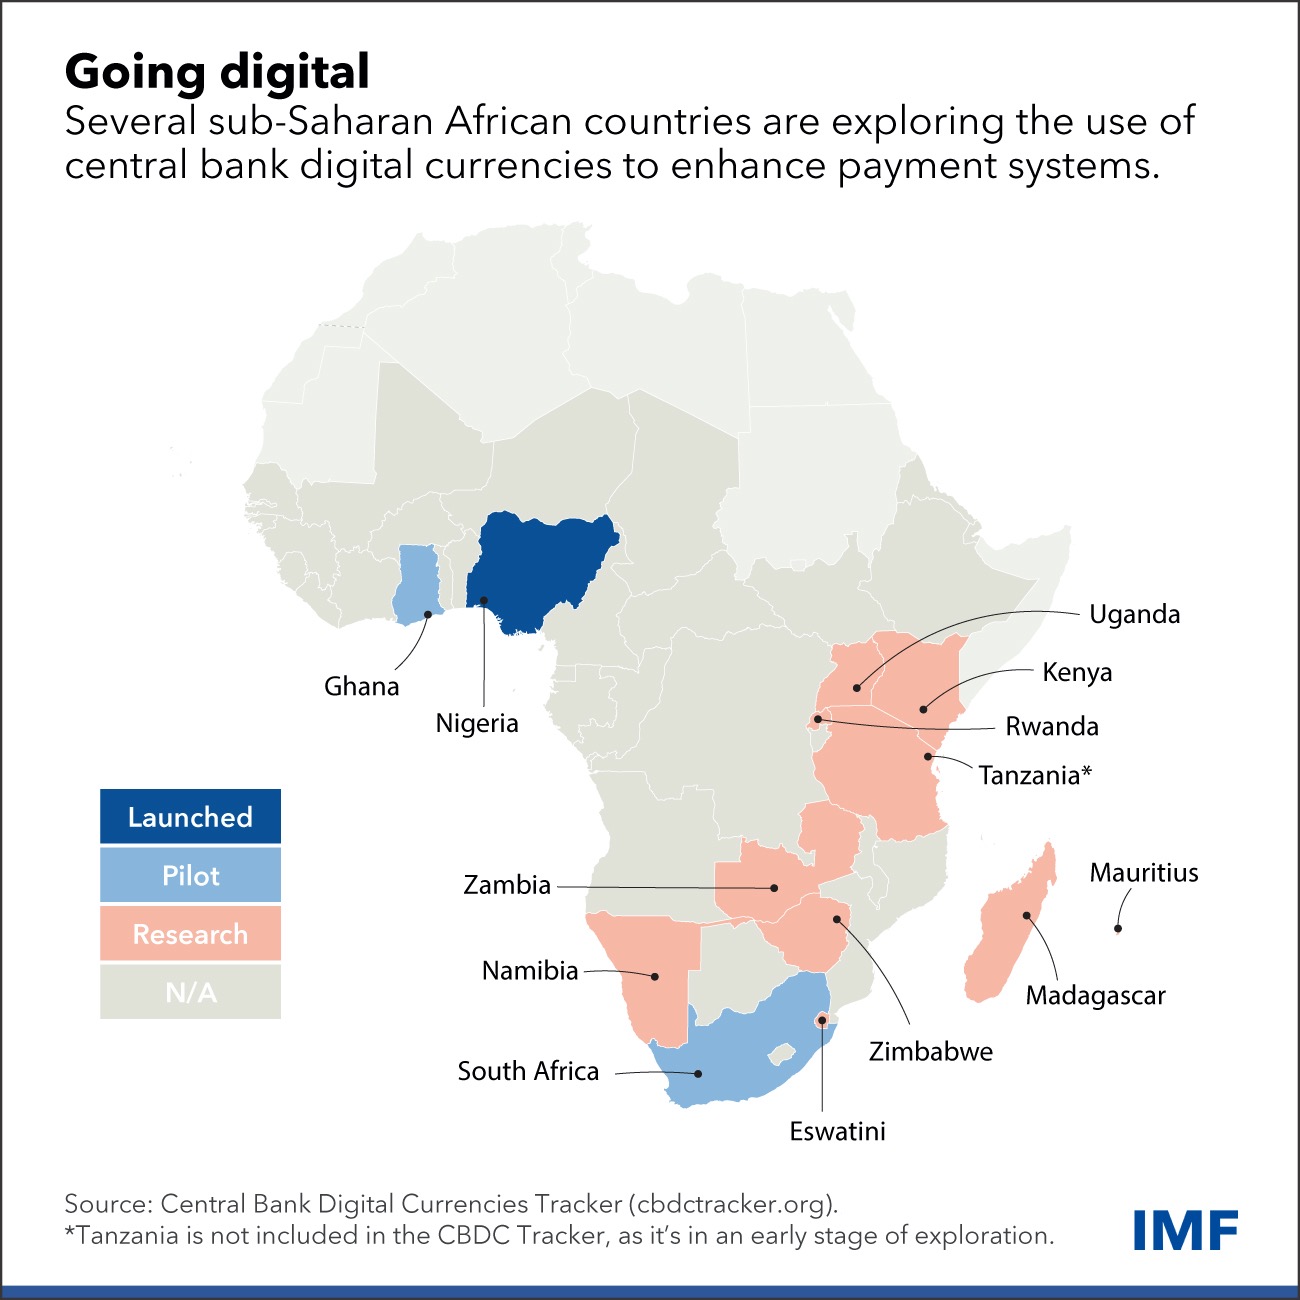  More African Central Banks Are Exploring Digital Currencies